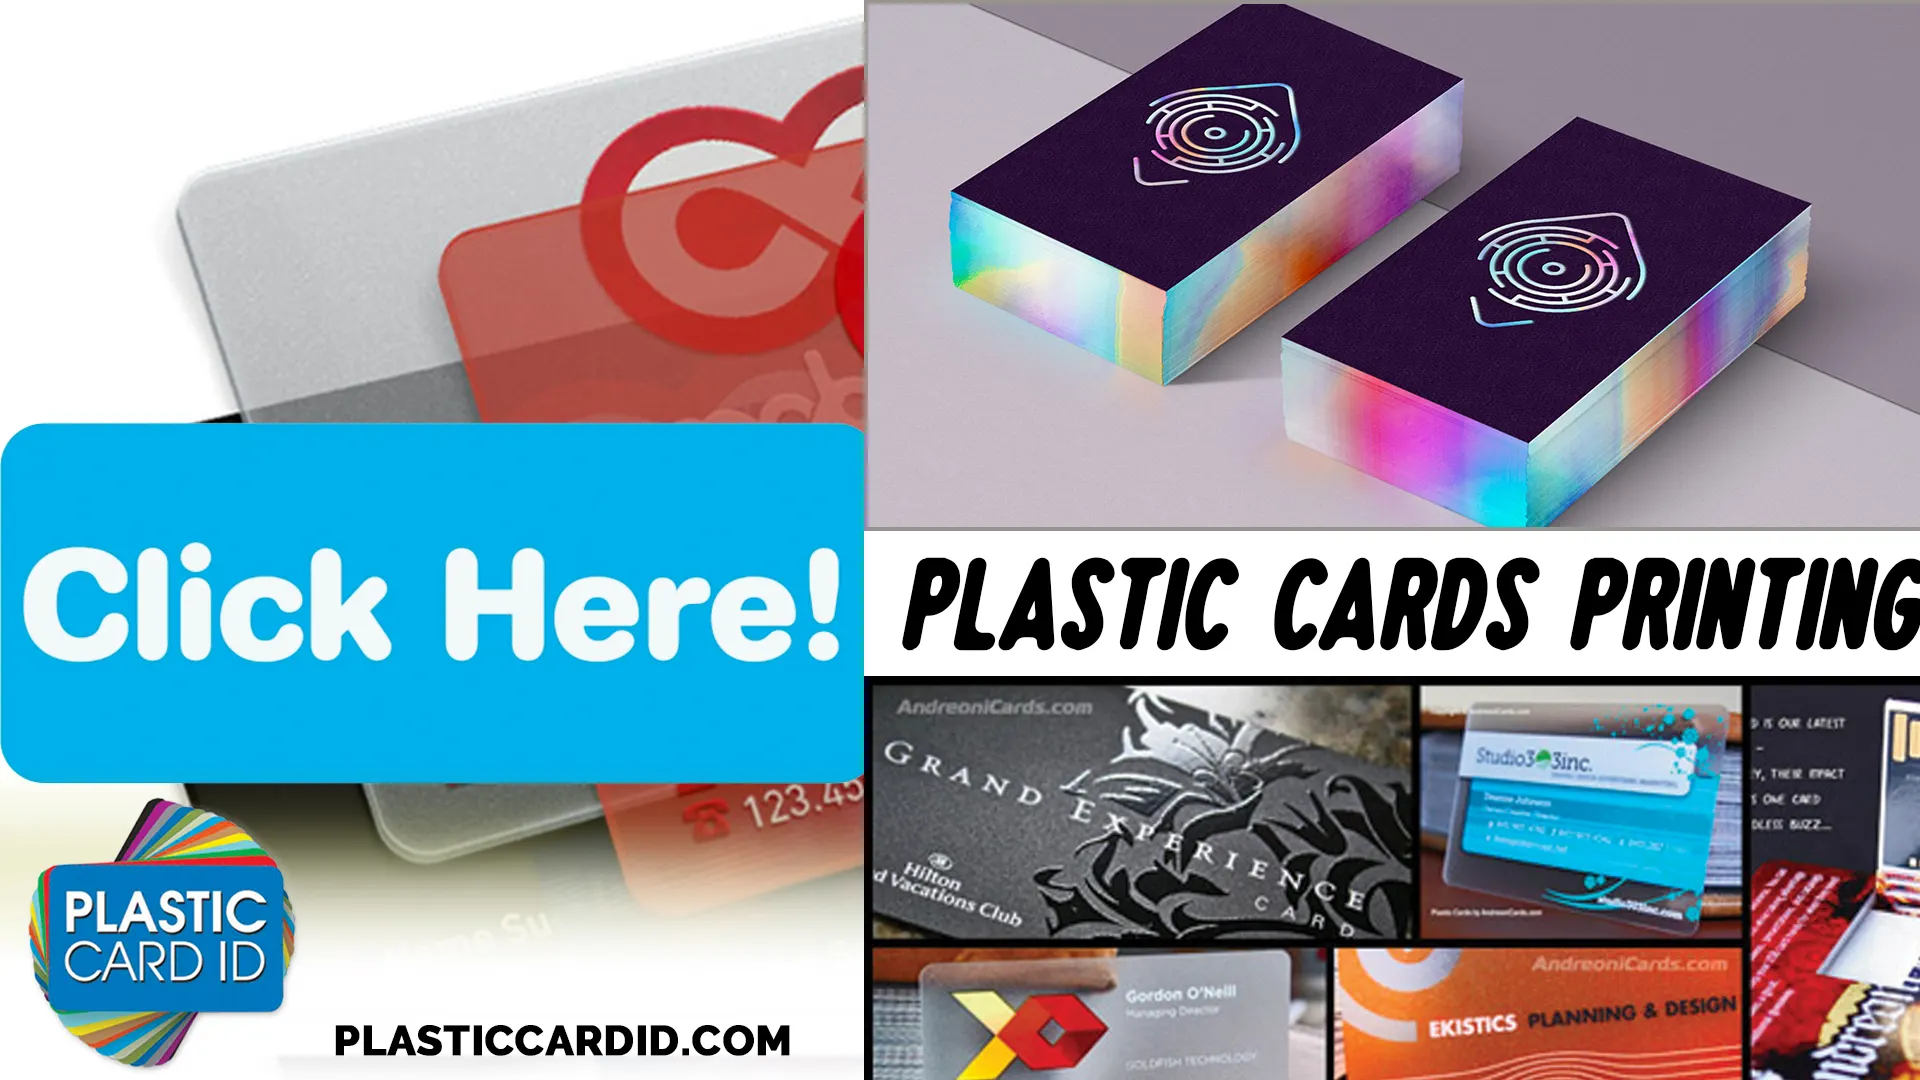 Welcome to Plastic Card ID
's Comprehensive Guide to Zebra Printers for Your Business